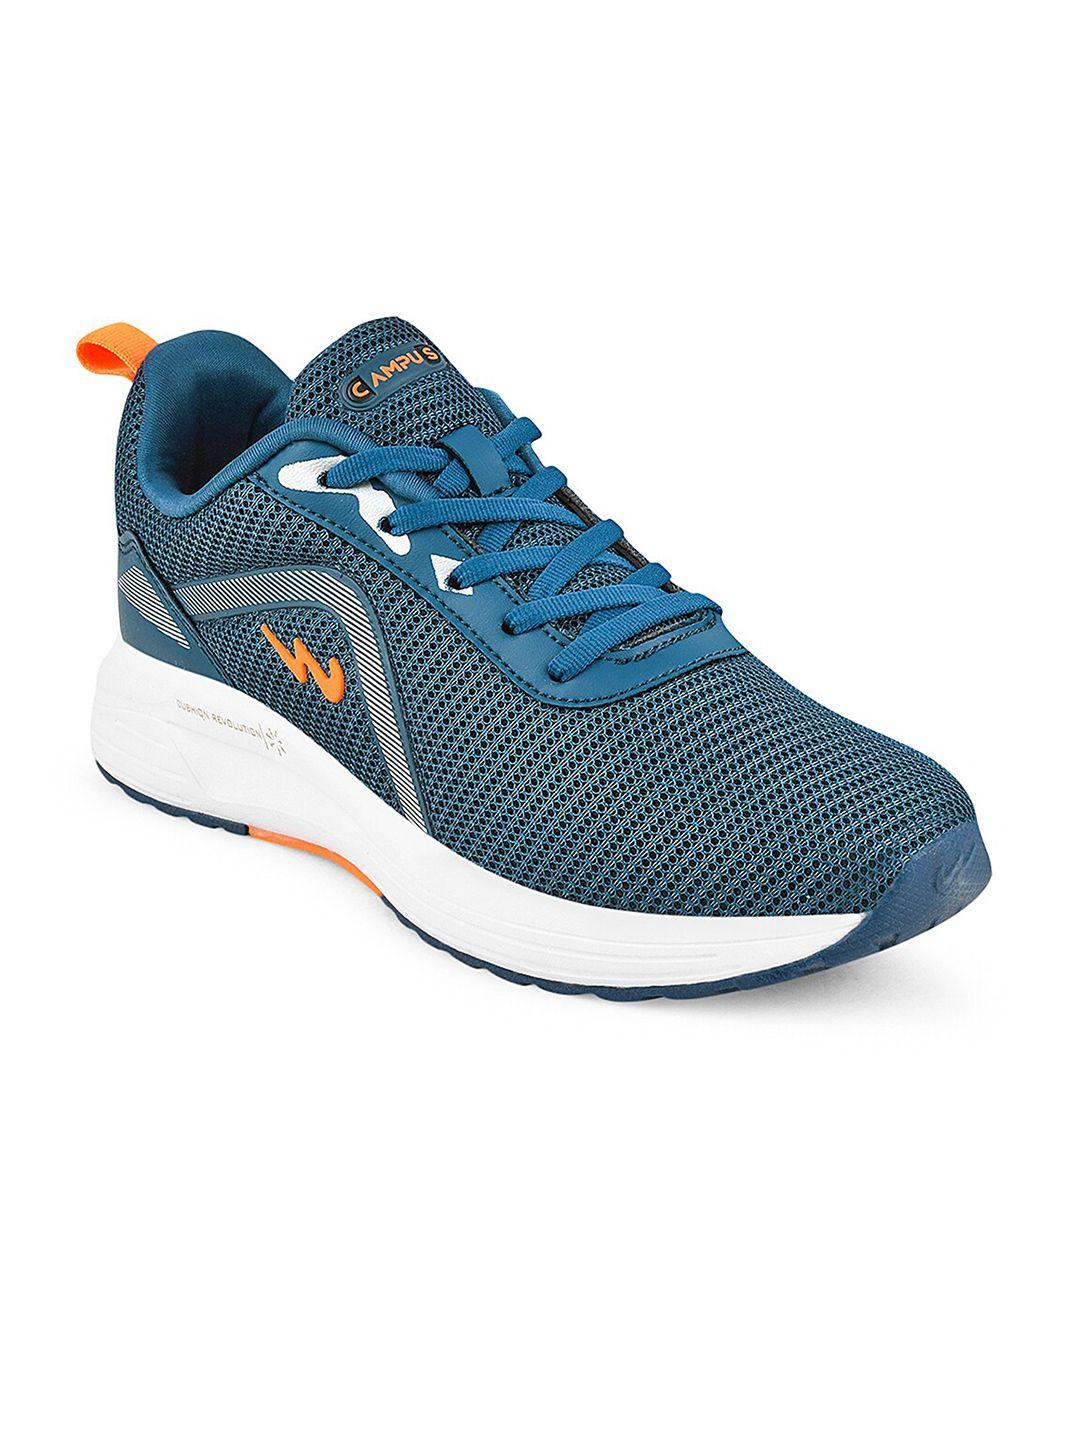 campus-men-road-running-sports-shoes